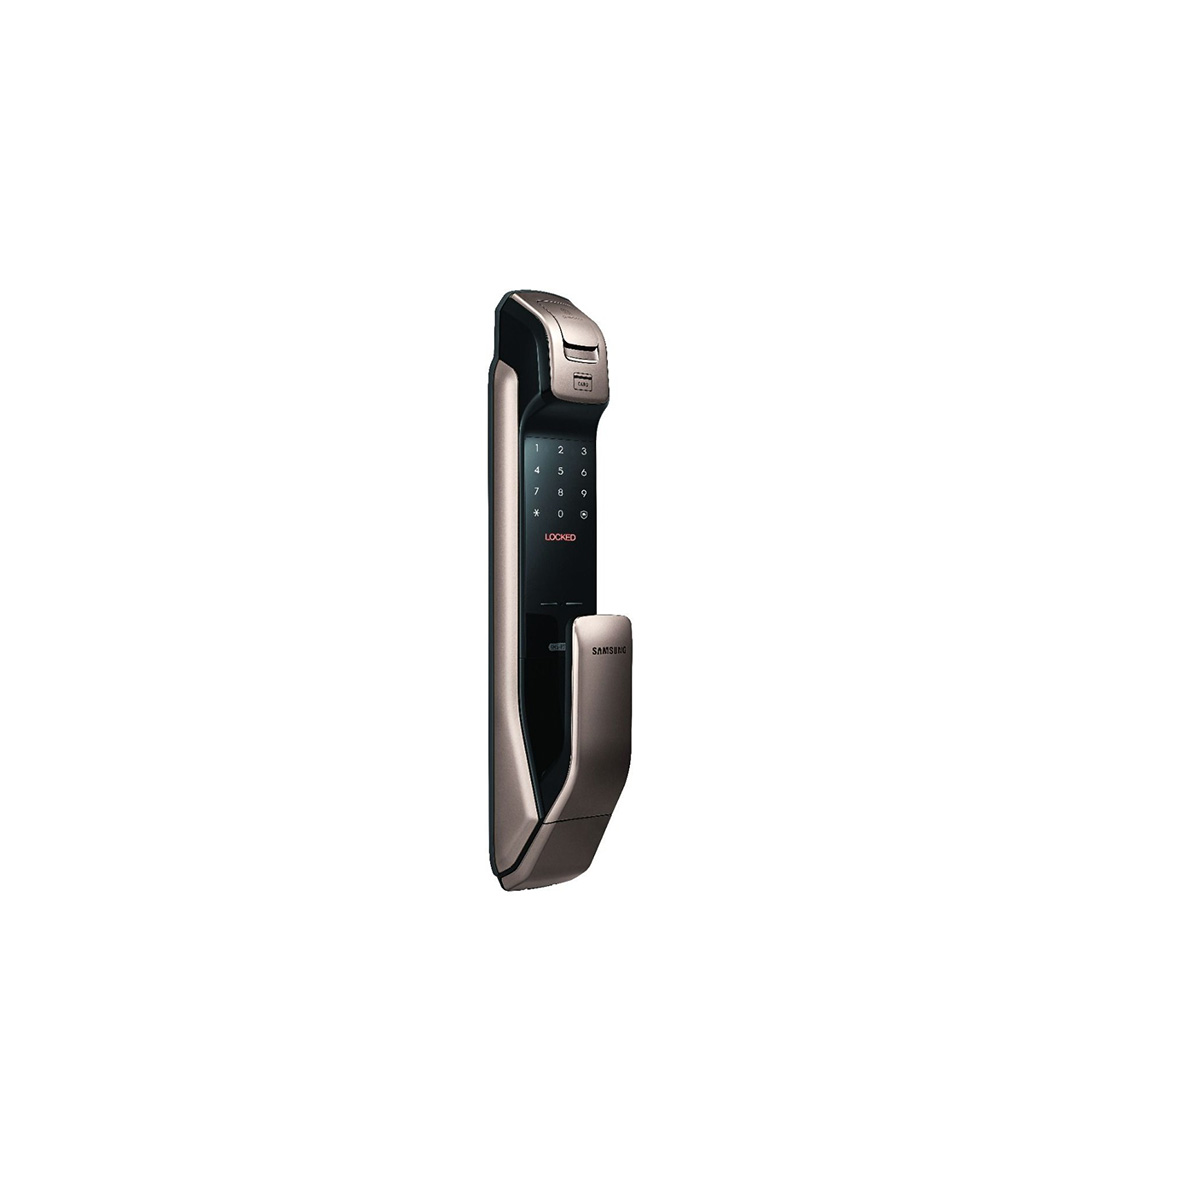 Samsung SHP-DP728 Smart lock with Push-Pull handle